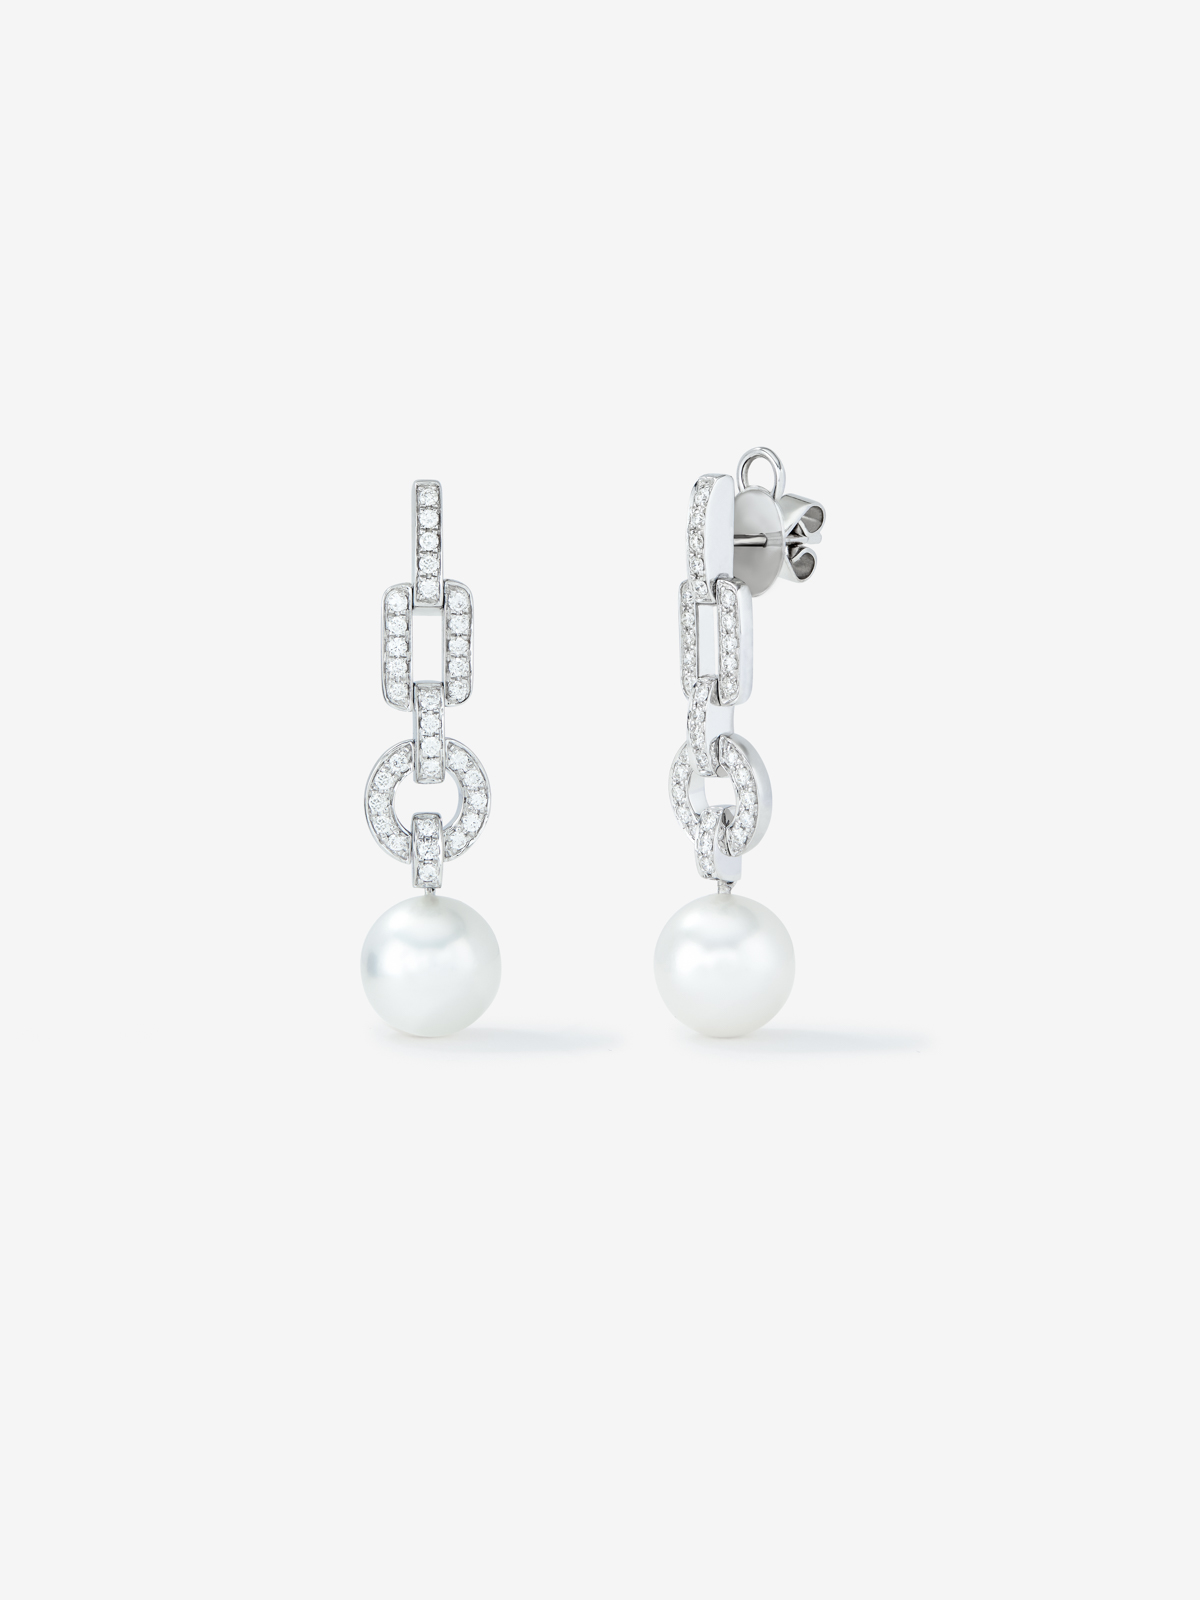 18k white gold hanging earring with 10mm Australian pearl and diamond.